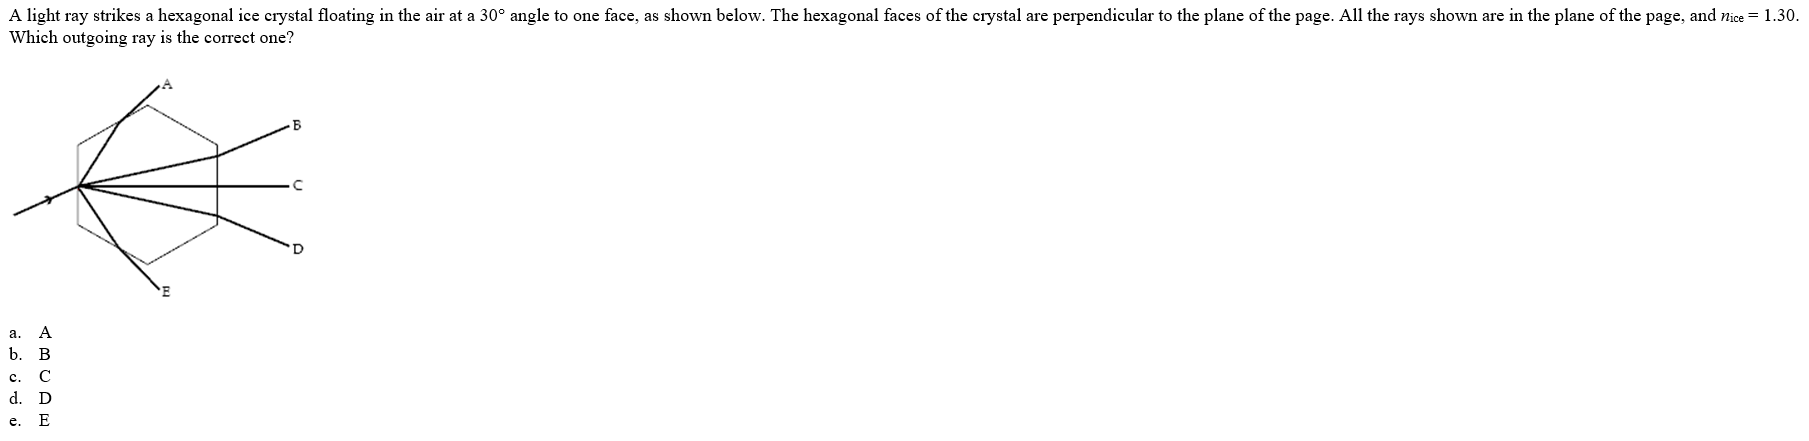 A light ray strikes a hexagonal ice crystal floating in the air at a 30° angle to one face, as shown below. The hexagonal faces of the crystal are perpendicular to the plane of the page. All the rays shown are in the plane of the page, and nice = 1.30.
Which outgoing ray is the correct one?
a.
b.
B
c.
d. D
e. E
